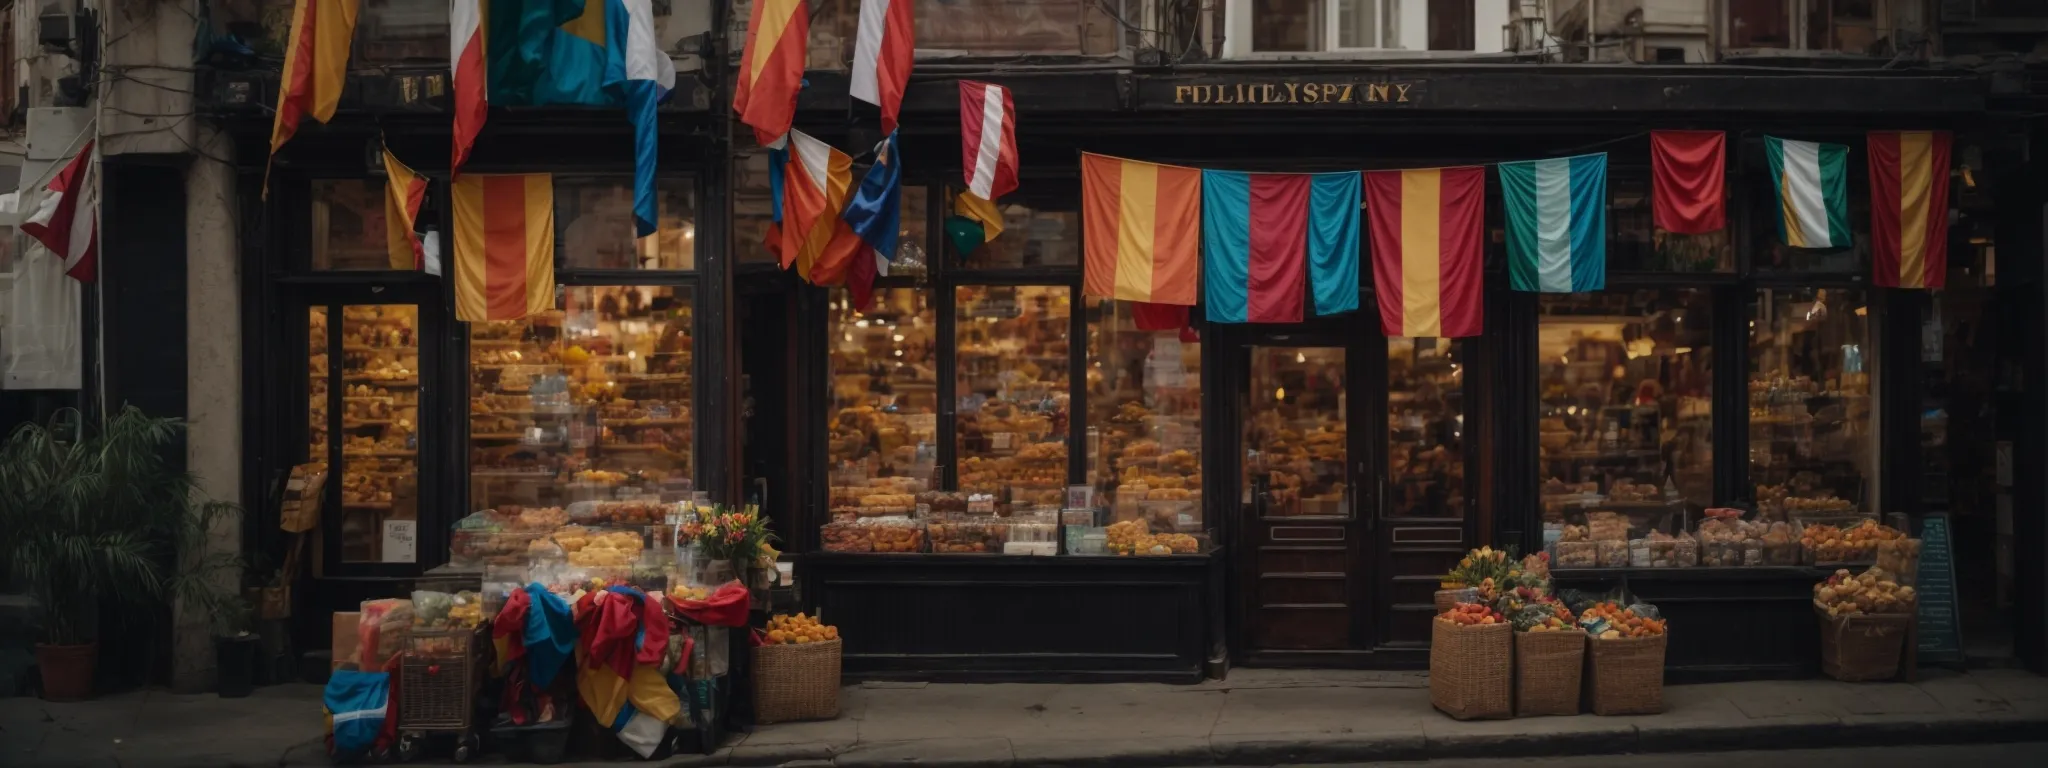 a small, vibrant shop front adorned with colorful flags in a busy street market captures the essence of a local business seeking to enhance its community footprint.